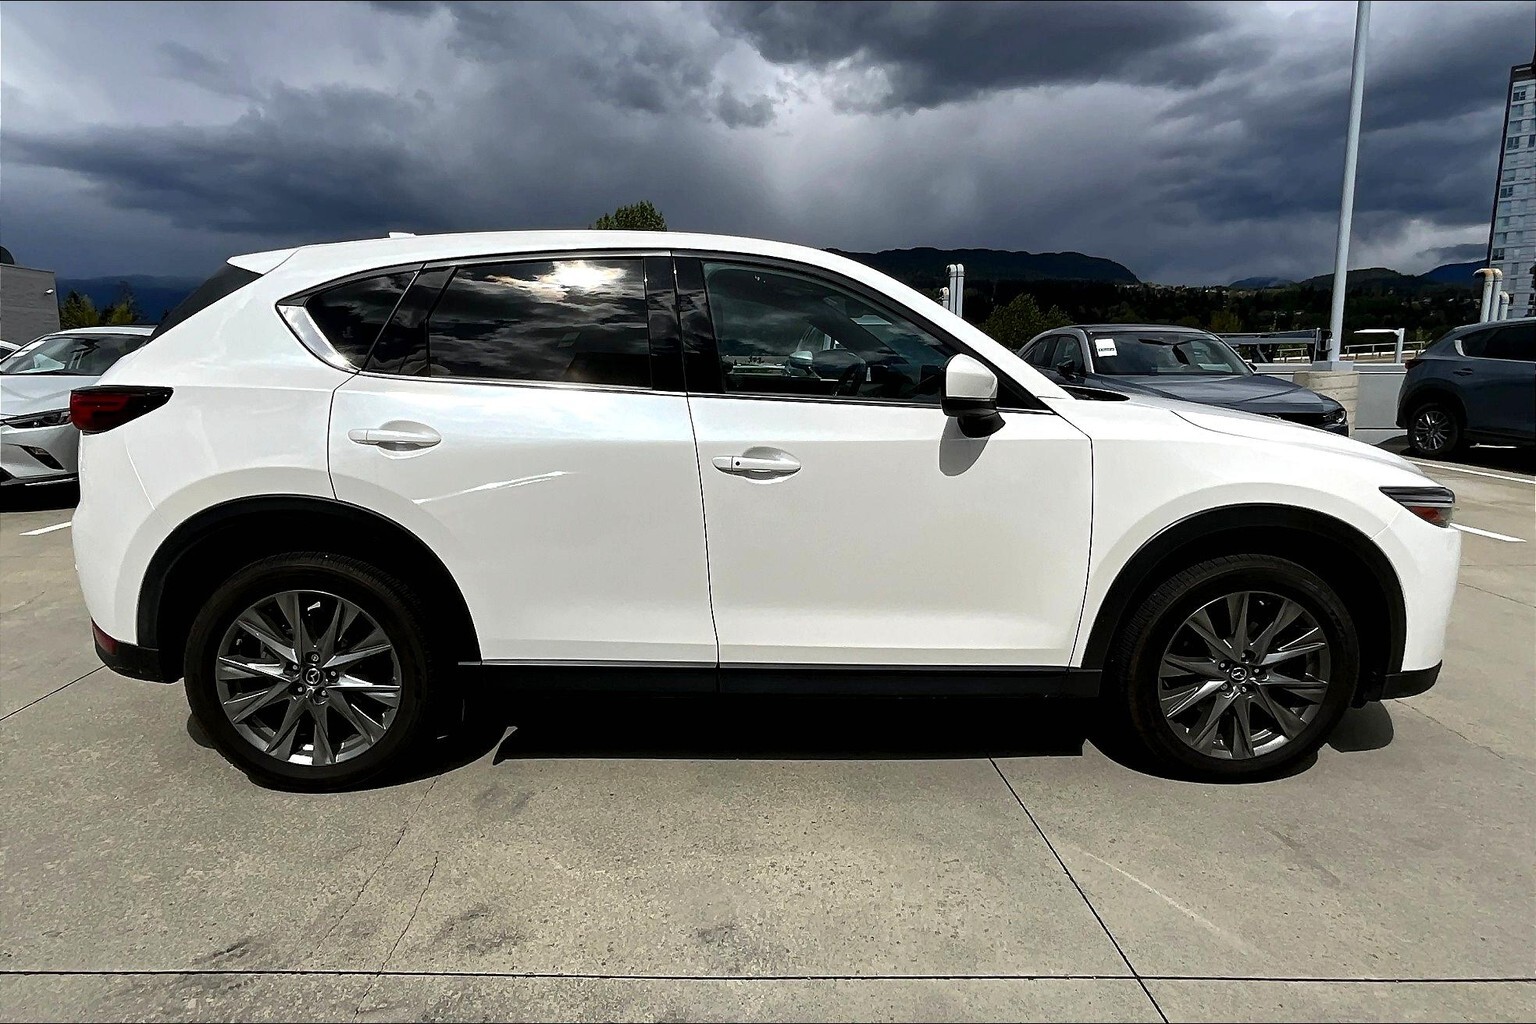 2020 Mazda CX-5 Signature AWD at TOP OF LINE|ONE OWNER|NO ACCIDENT